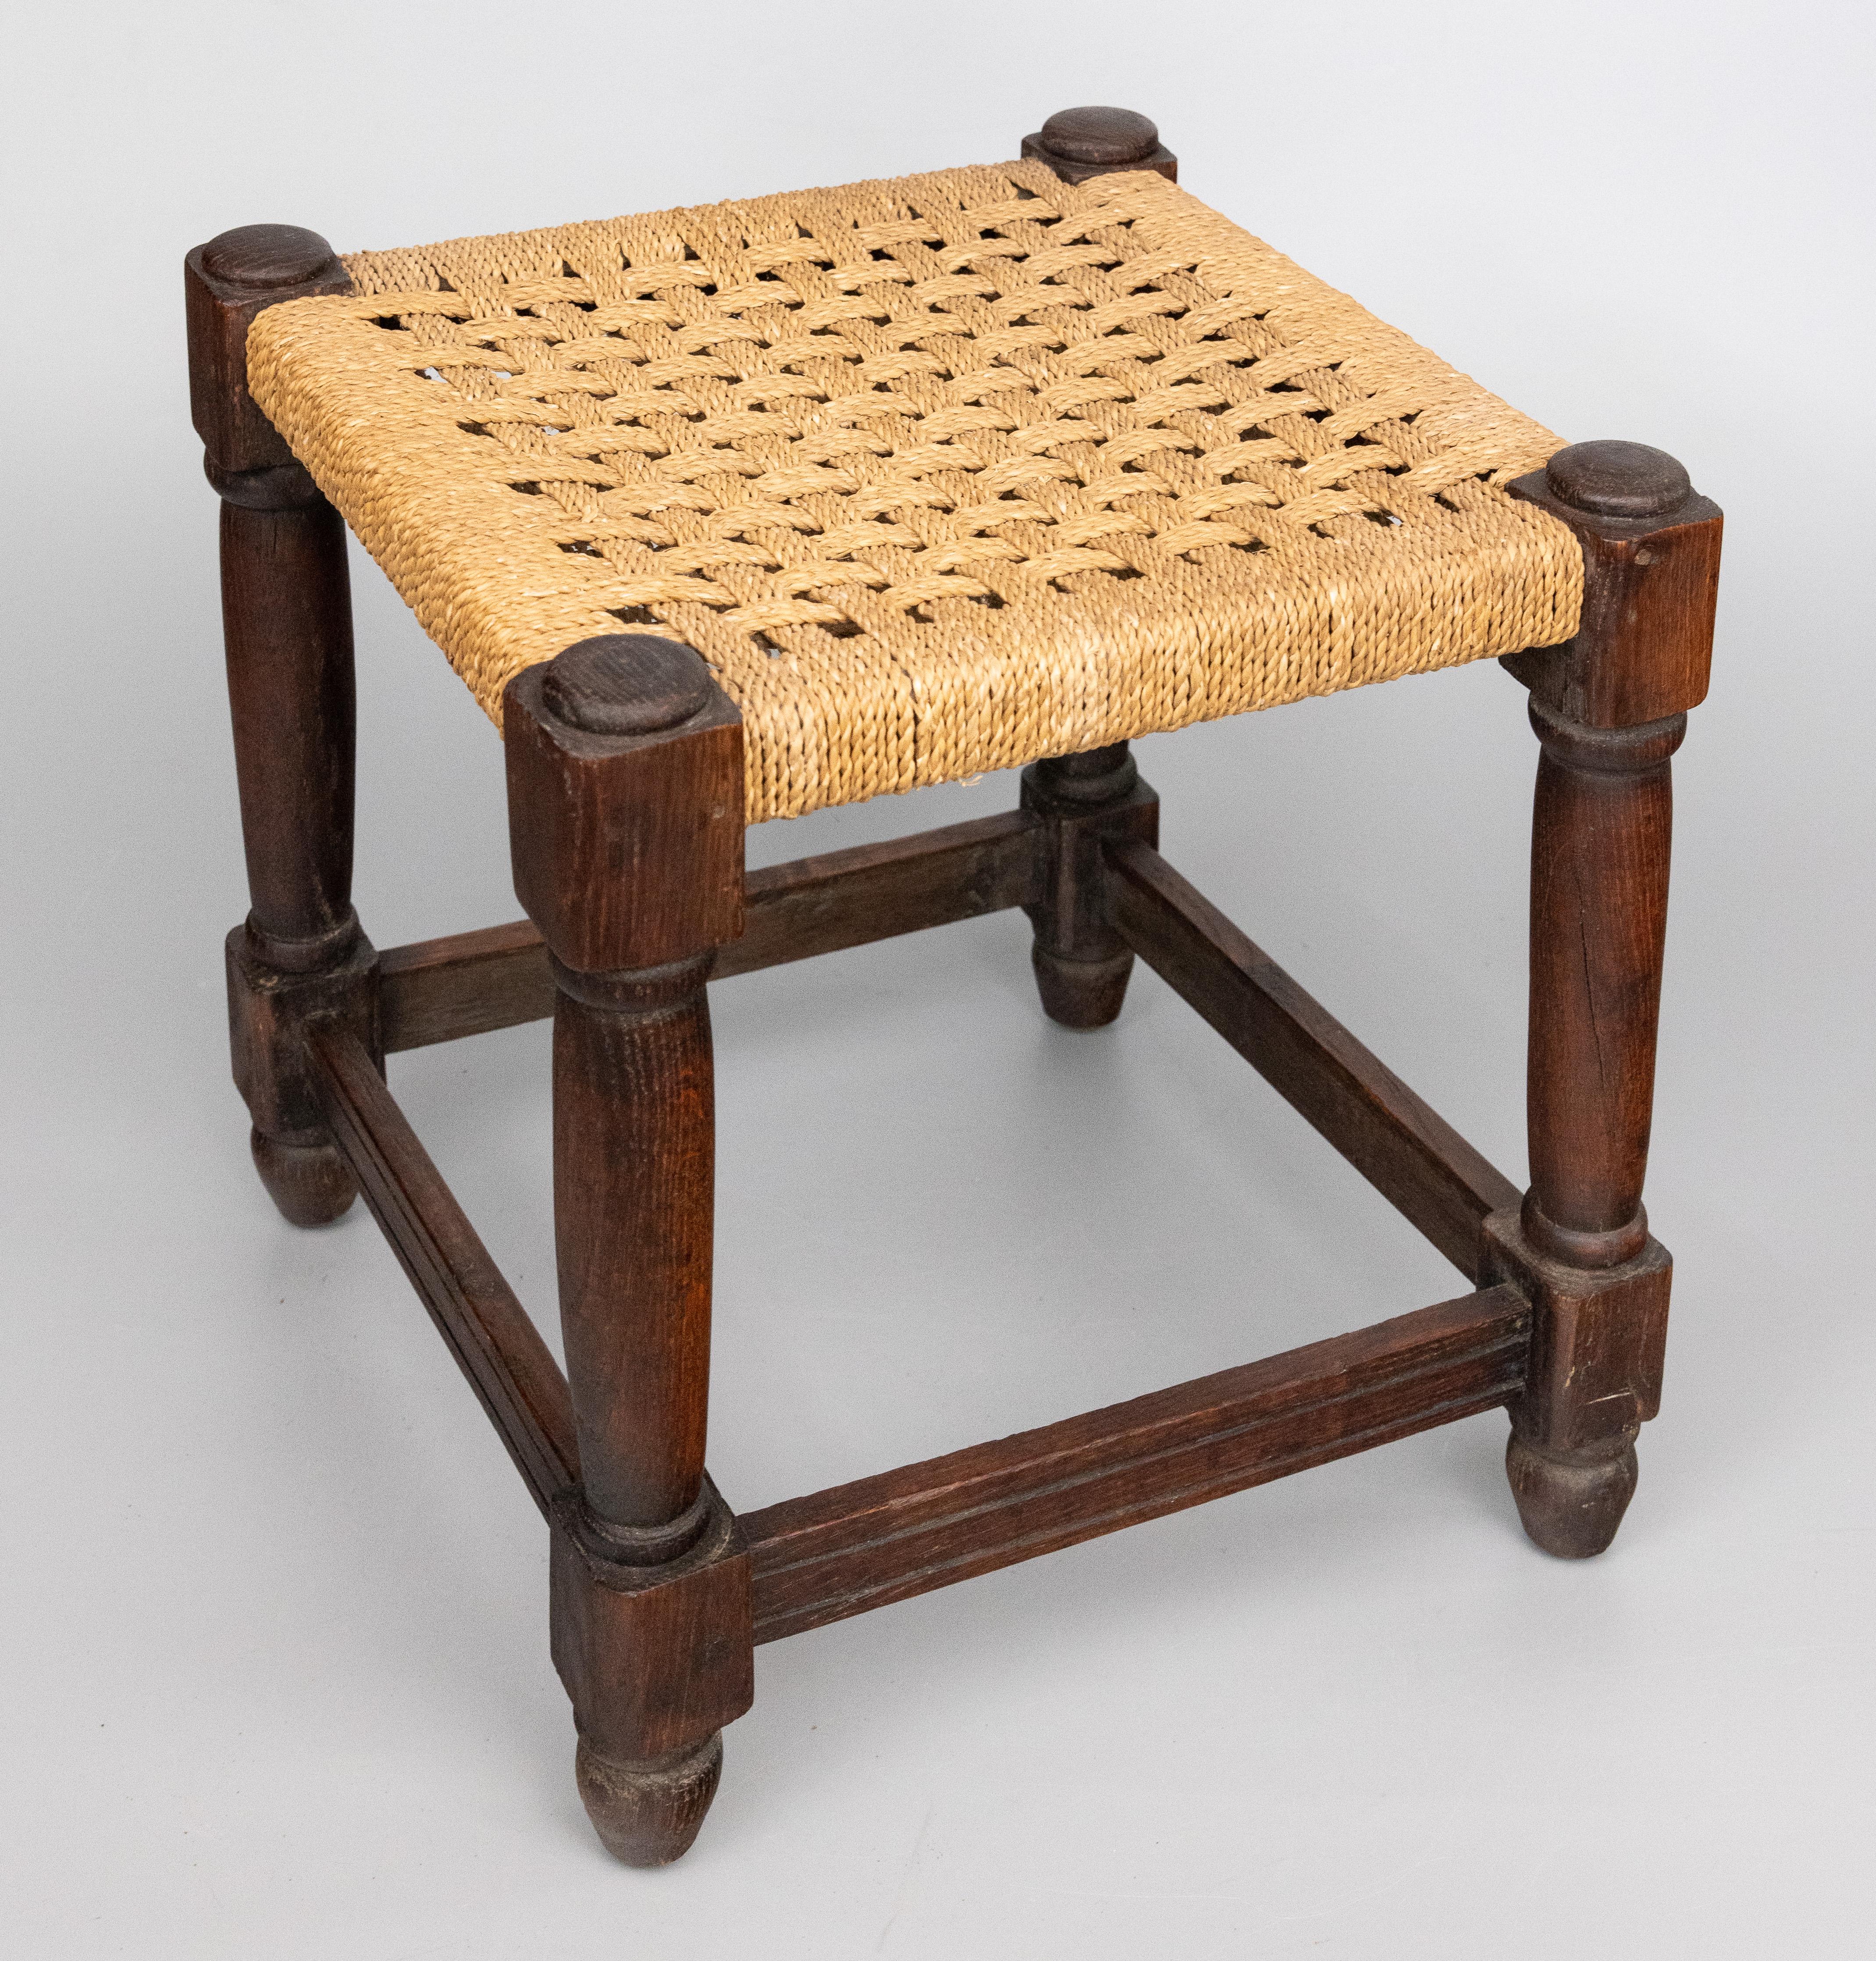 A superb English oak stool / footstool with hand turned legs and stretchers and hand woven corded string seat, circa 1900. This charming stool would make a wonderful foot rest or a small drinks table with a tray on top.

DIMENSIONS
14.75ʺW × 14.75ʺD